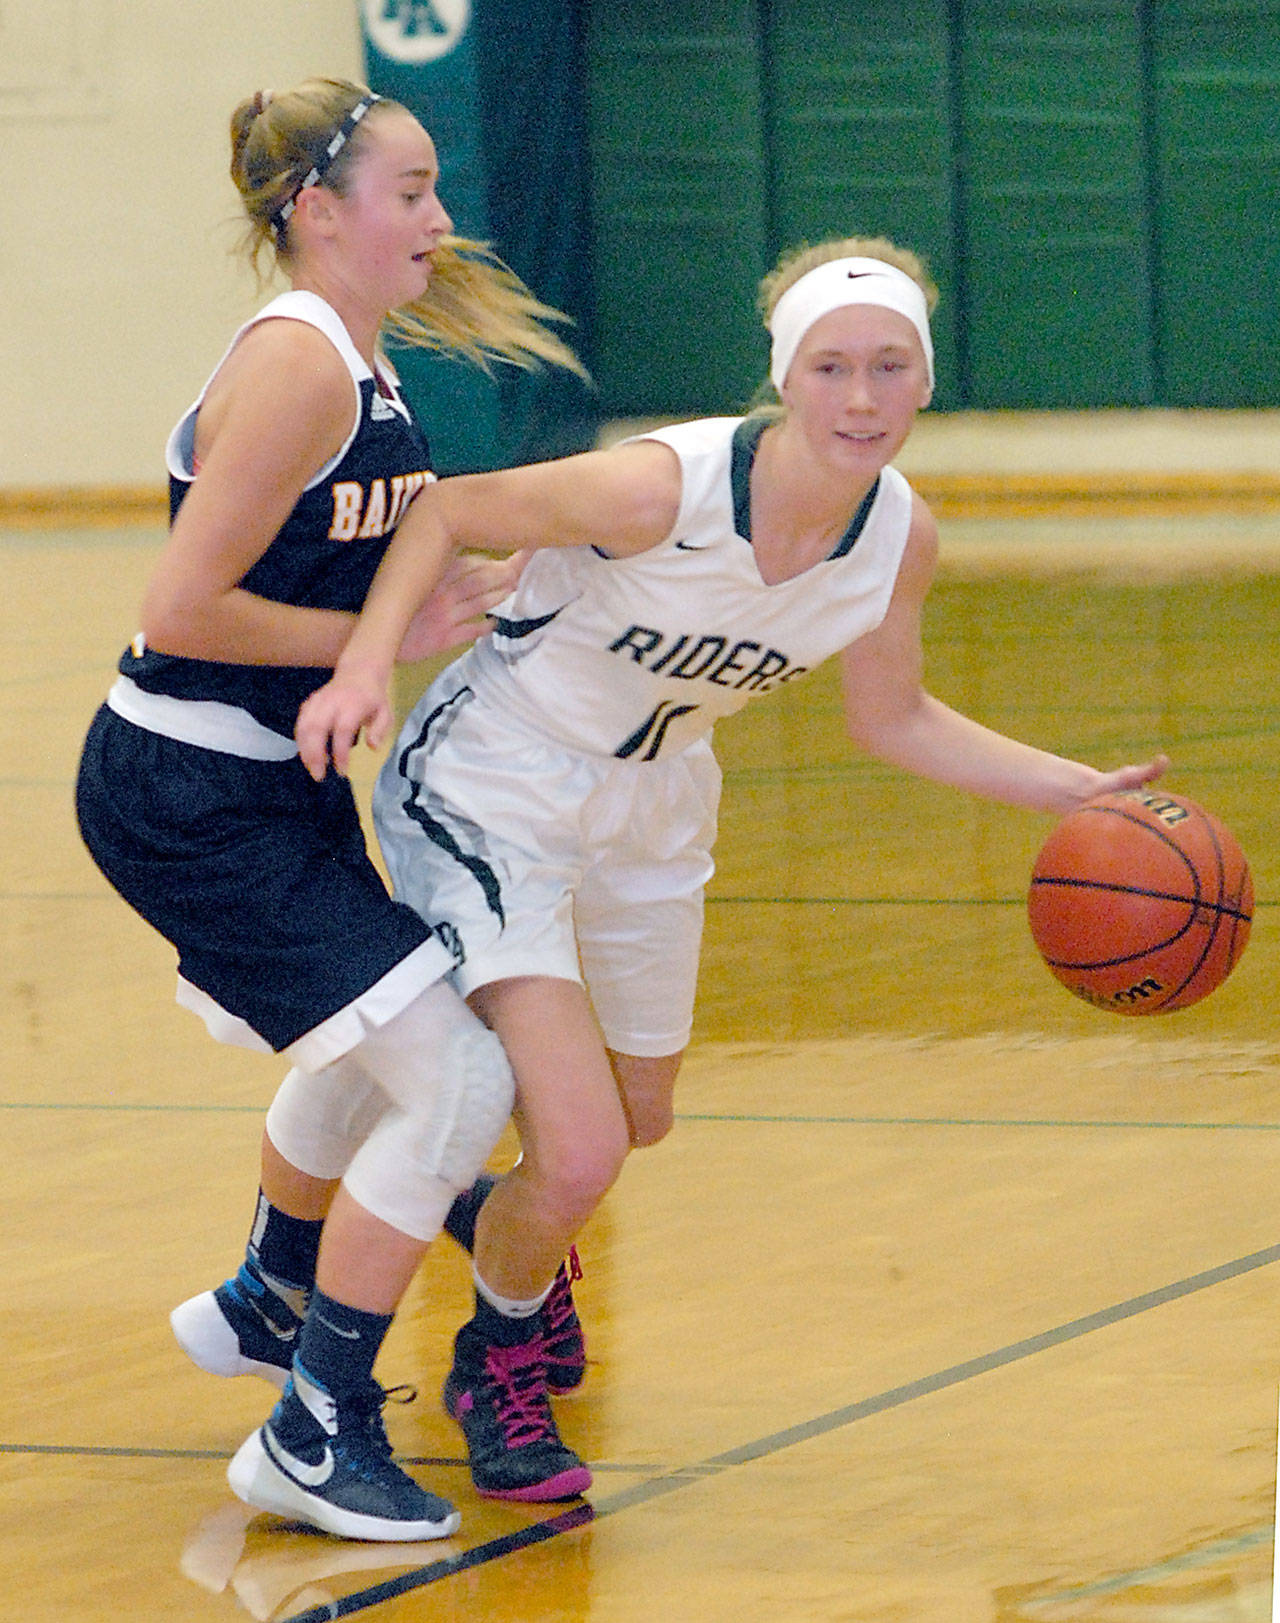 Keith Thorpe/Peninsula Daily News Port Angeles’ Gracie Long drives down court past the defense of Bainbridge’s Ellie Woolever in the second quarter on Wednesday at Port Angeles High School.